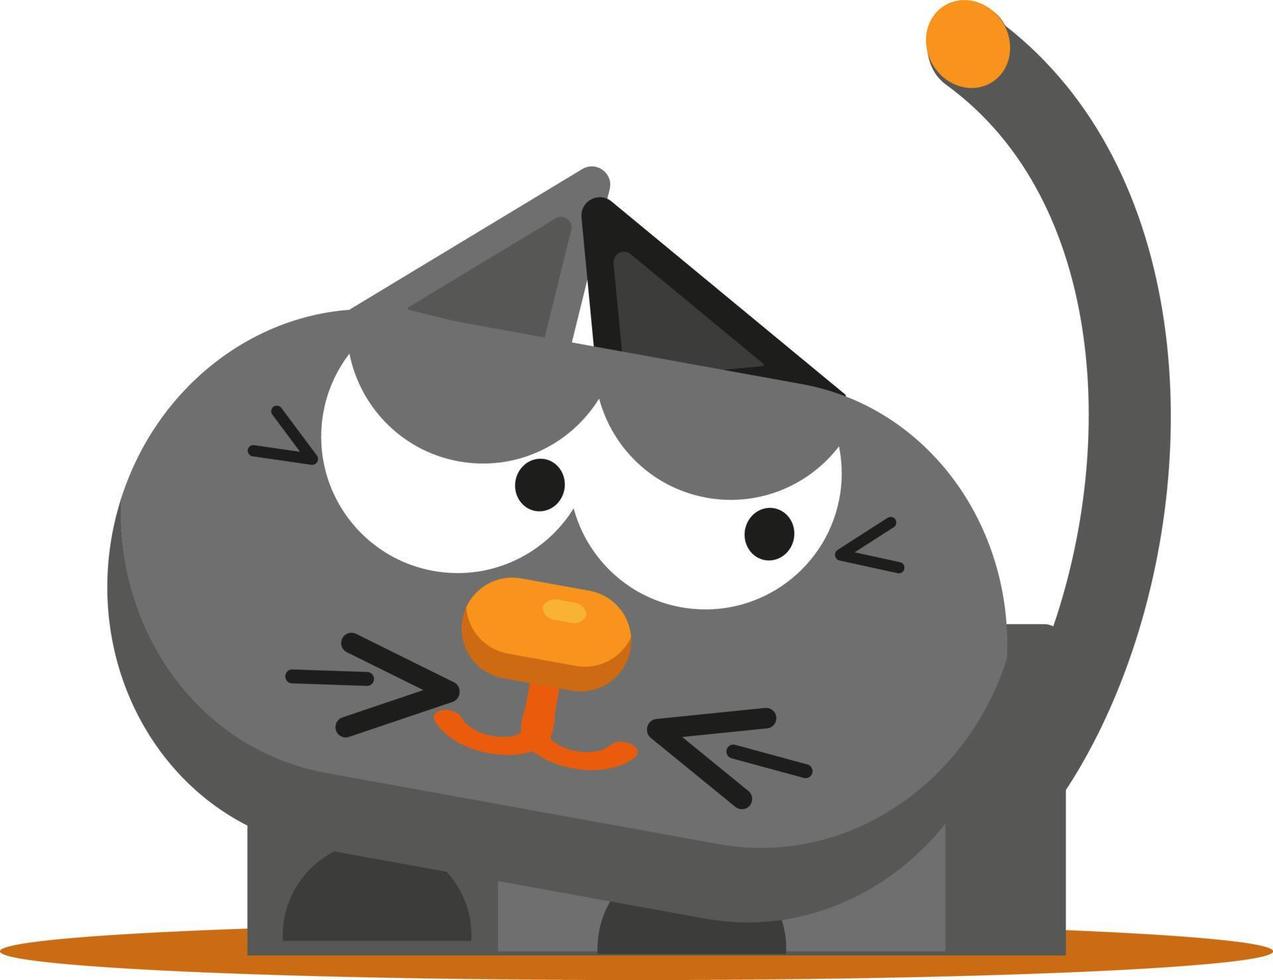 Angry grey cat, illustration, vector on a white background.